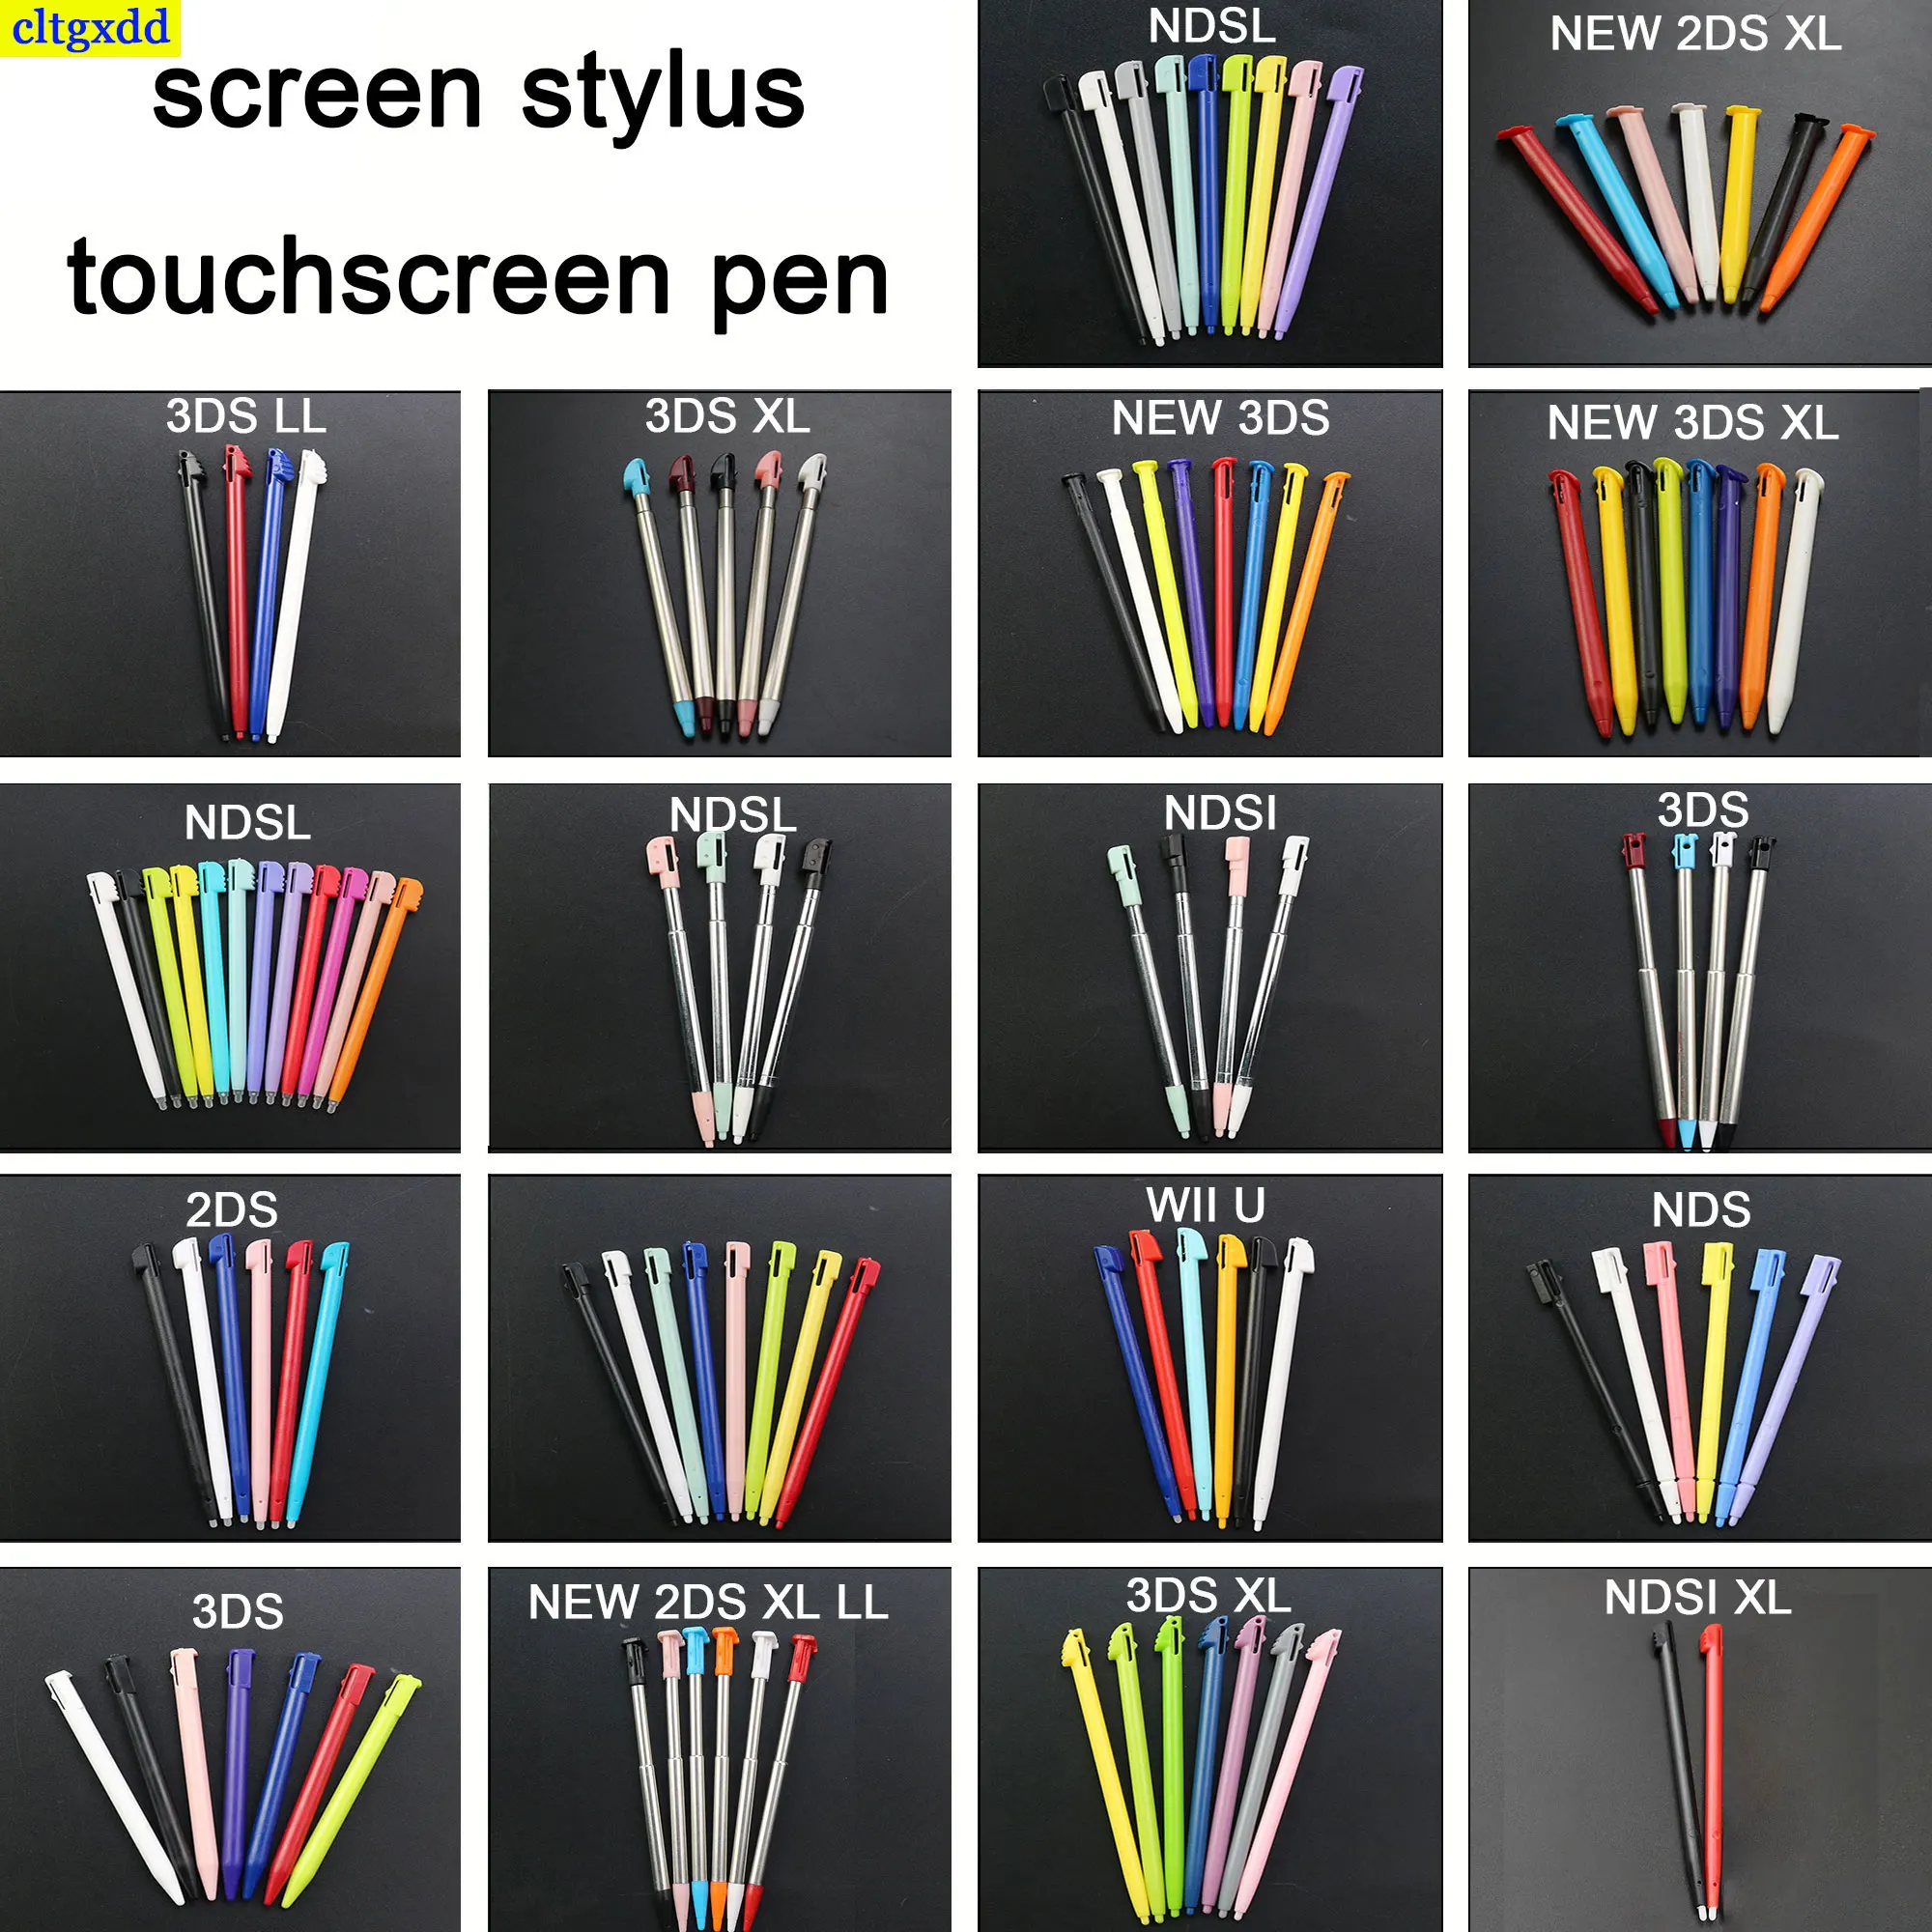 1 Set Plastic Stylus for 2DS 3DS XL LL New 2DS XL New 3DS XL Wii Metal Retractable Stylus for DS Lite NDS NDSL NDSi XL